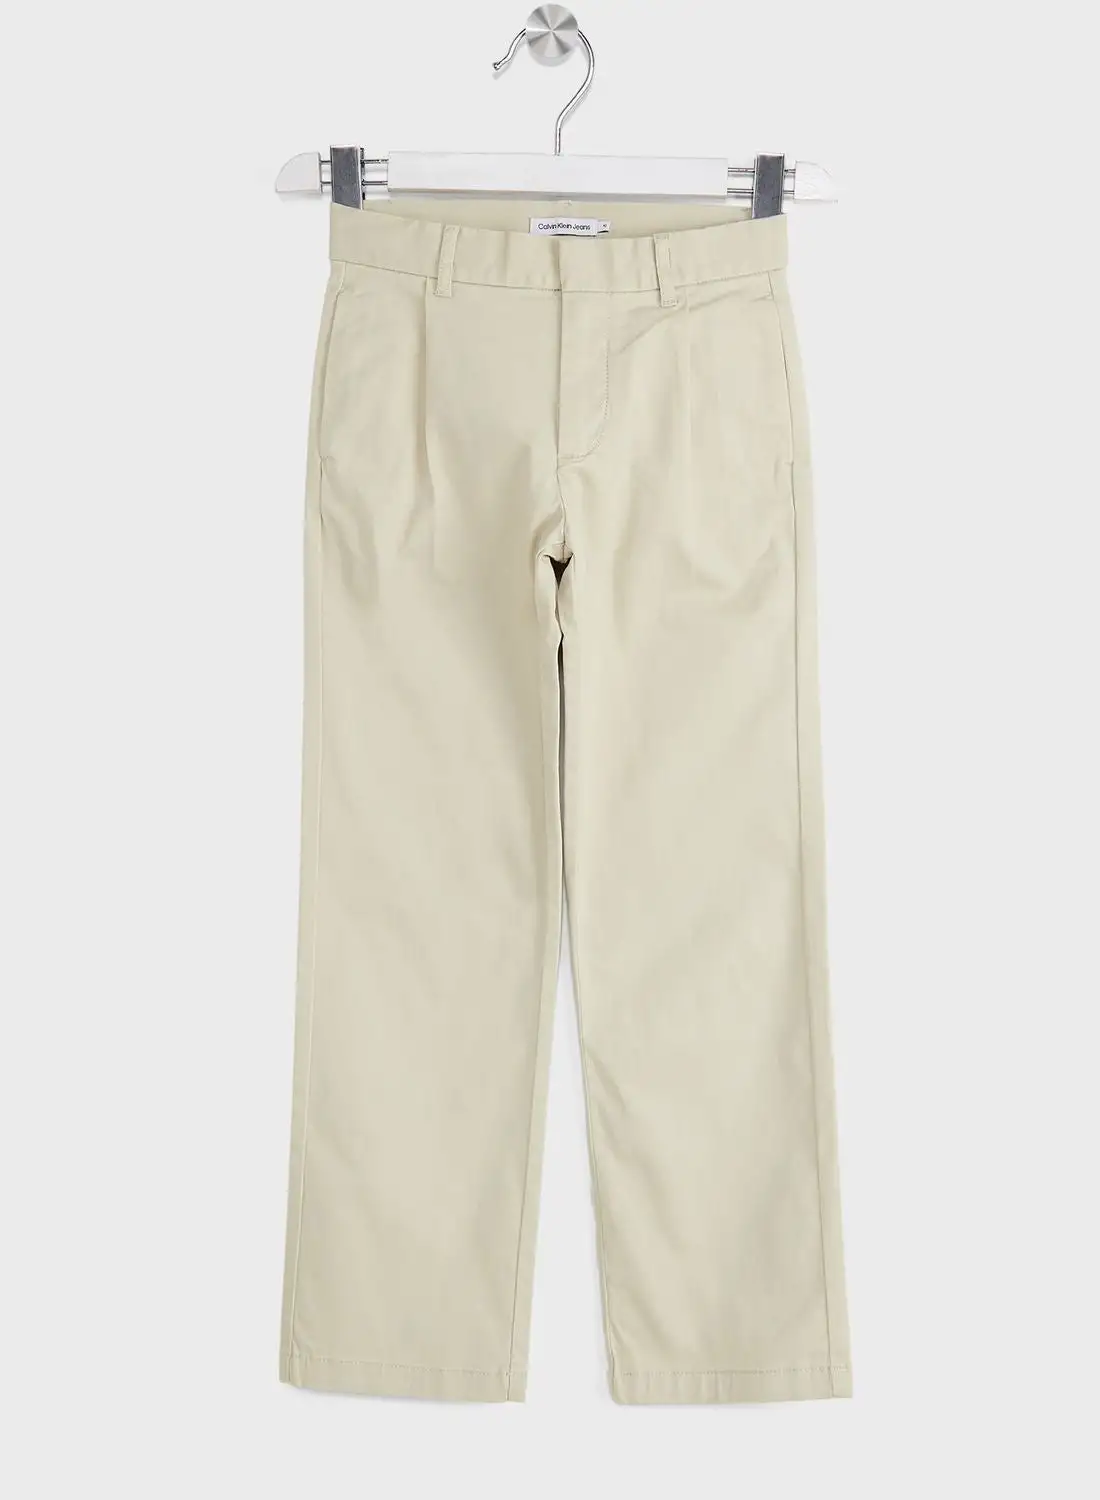 Calvin Klein Jeans Youth Straight Fit Chinos